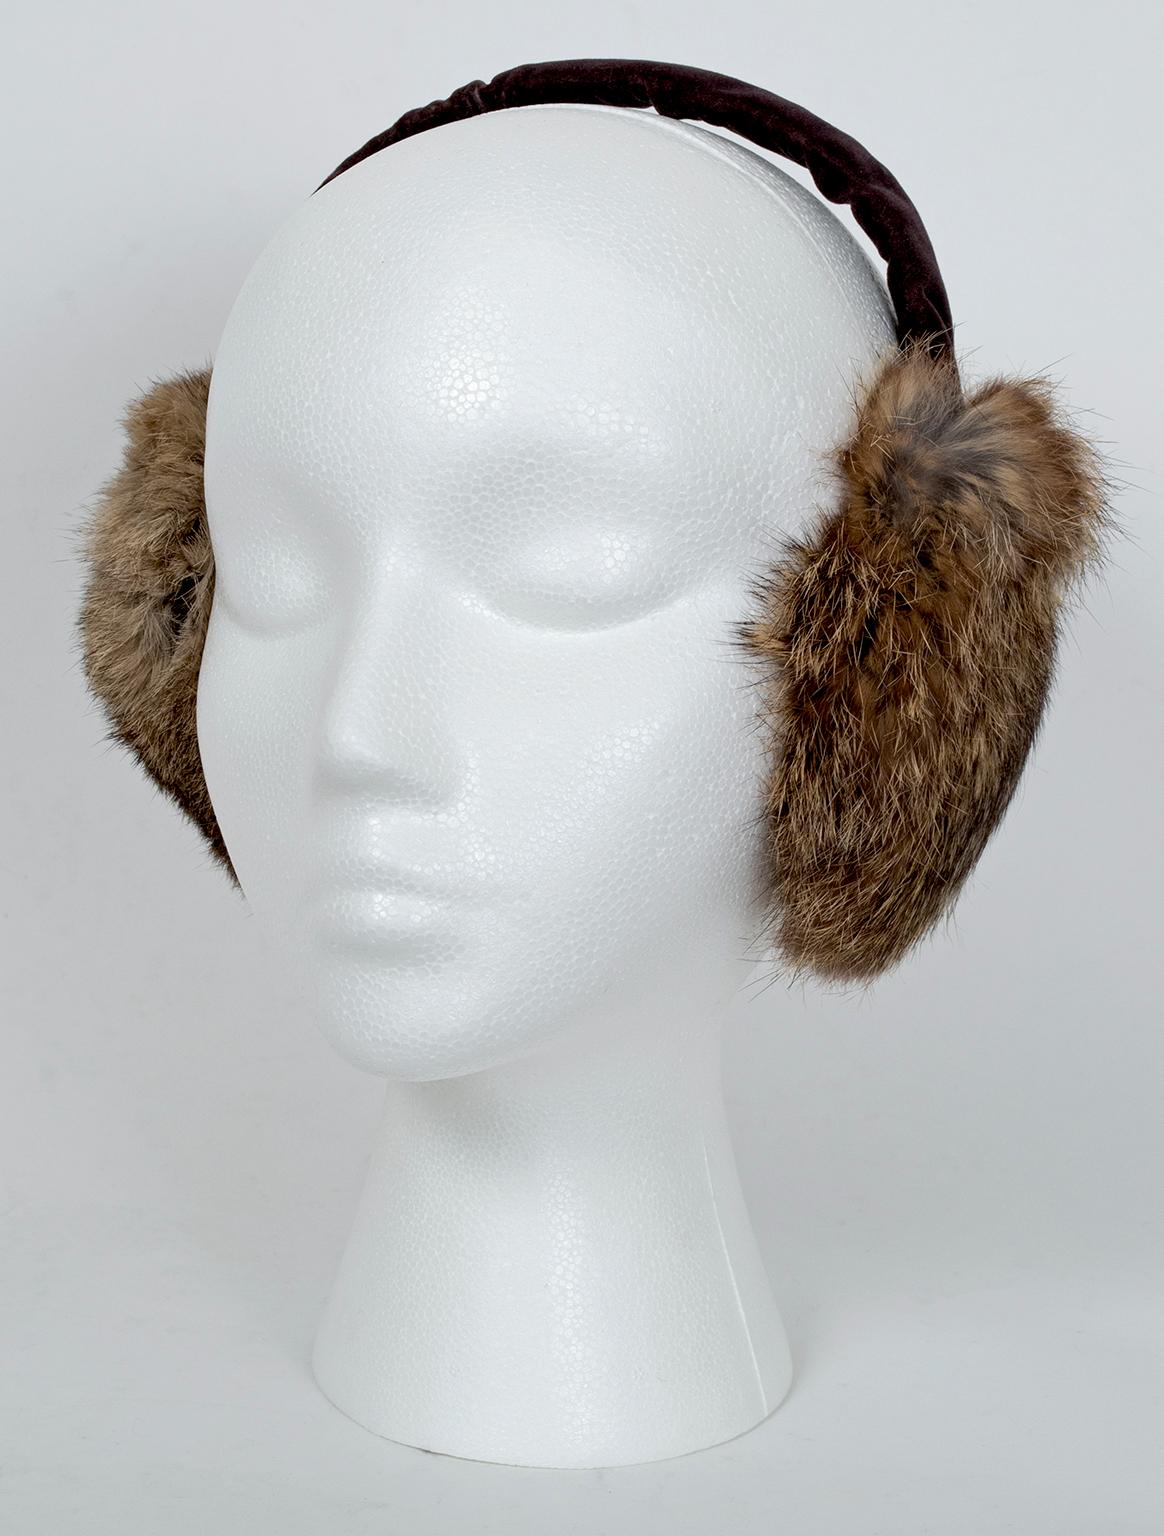 It's the little things that make all the difference. To wit, these fox earmuffs will not only keep you toasty warm but elevate your look at the same time. The beautiful color variation and long guard hairs softly frame the face for a 